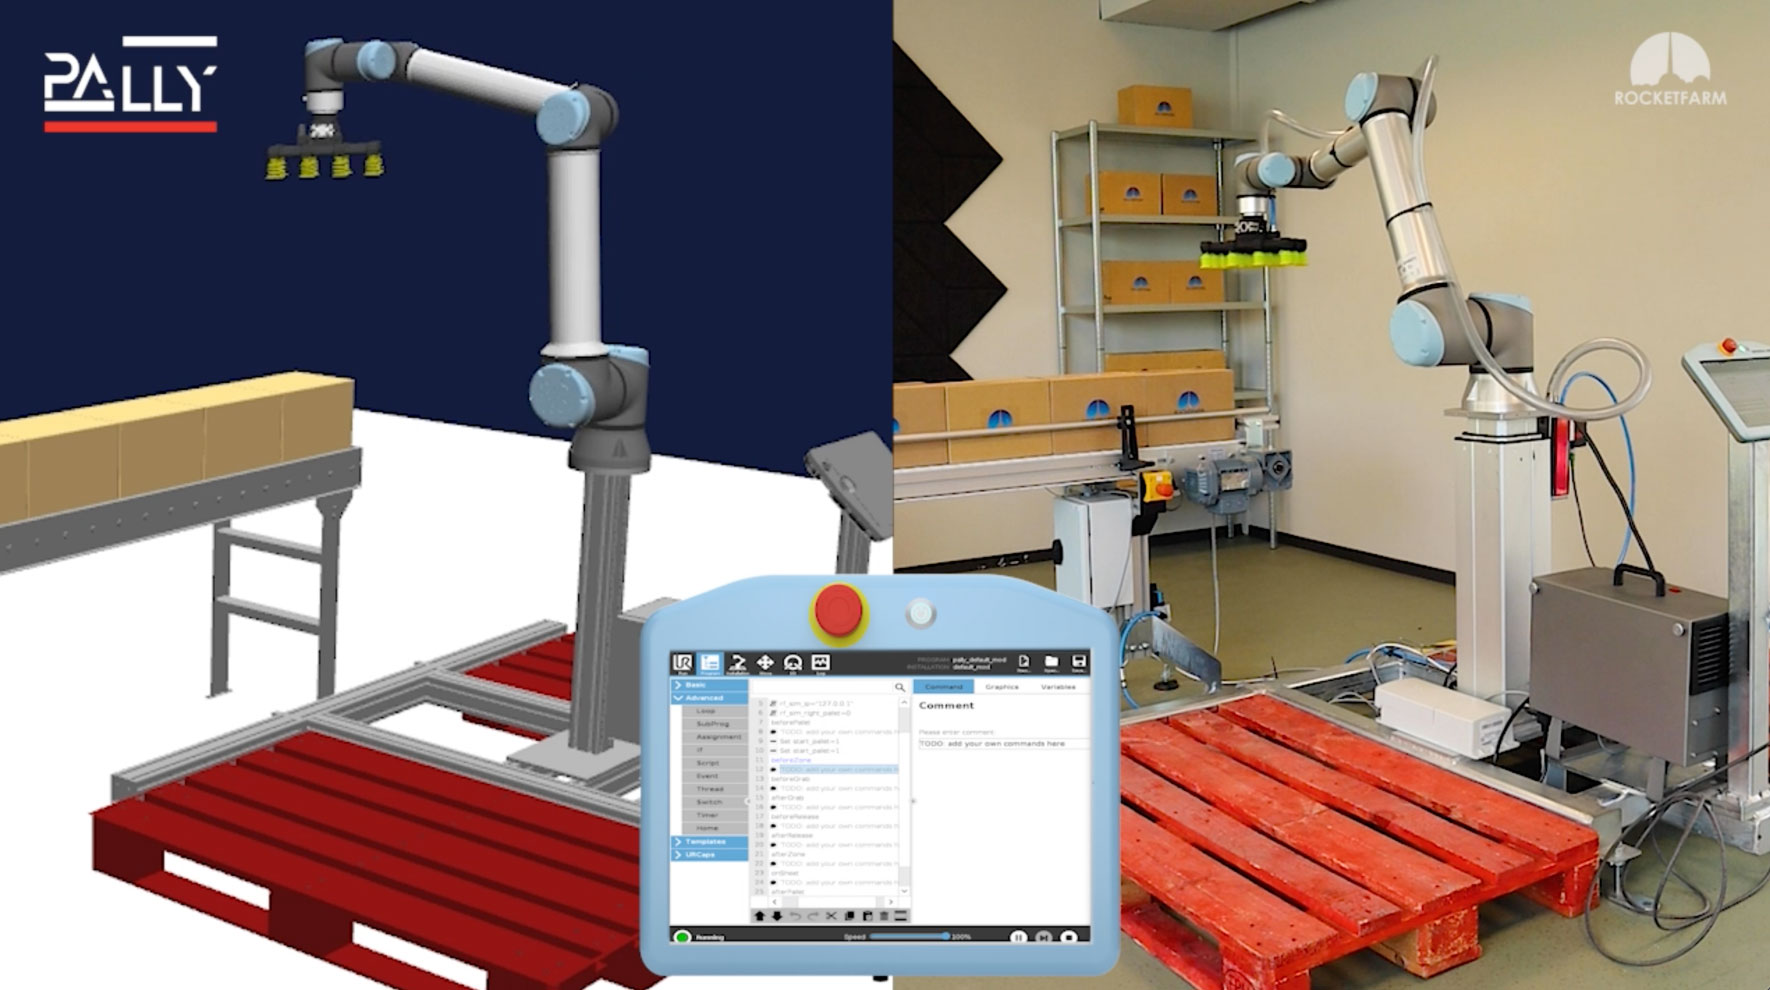 Video of simulation versus the real palletizing solution using the Pally URCap